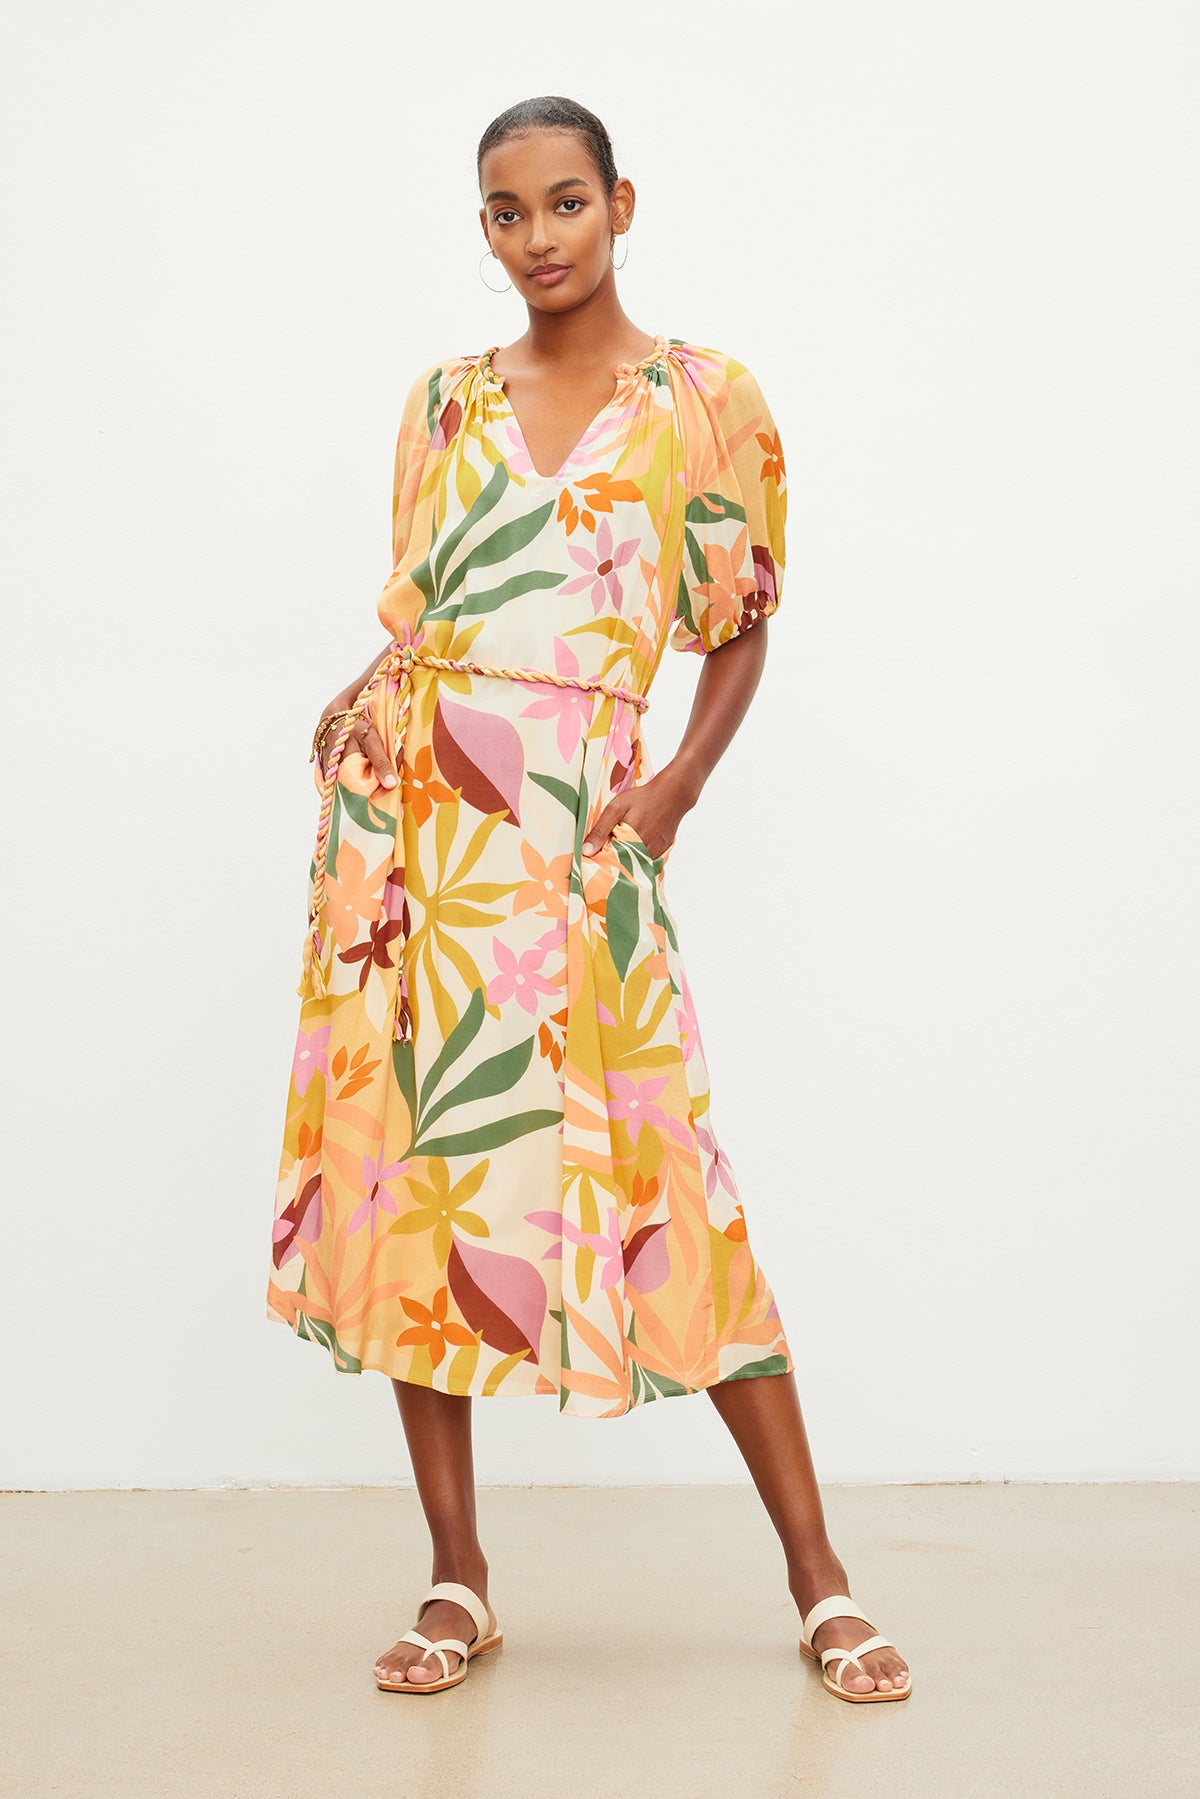 A woman standing, wearing a colorful floral printed CAROL BOHO DRESS by Velvet by Graham & Spencer and beige sandals, with her hands gently resting on her hips.-35955494289601